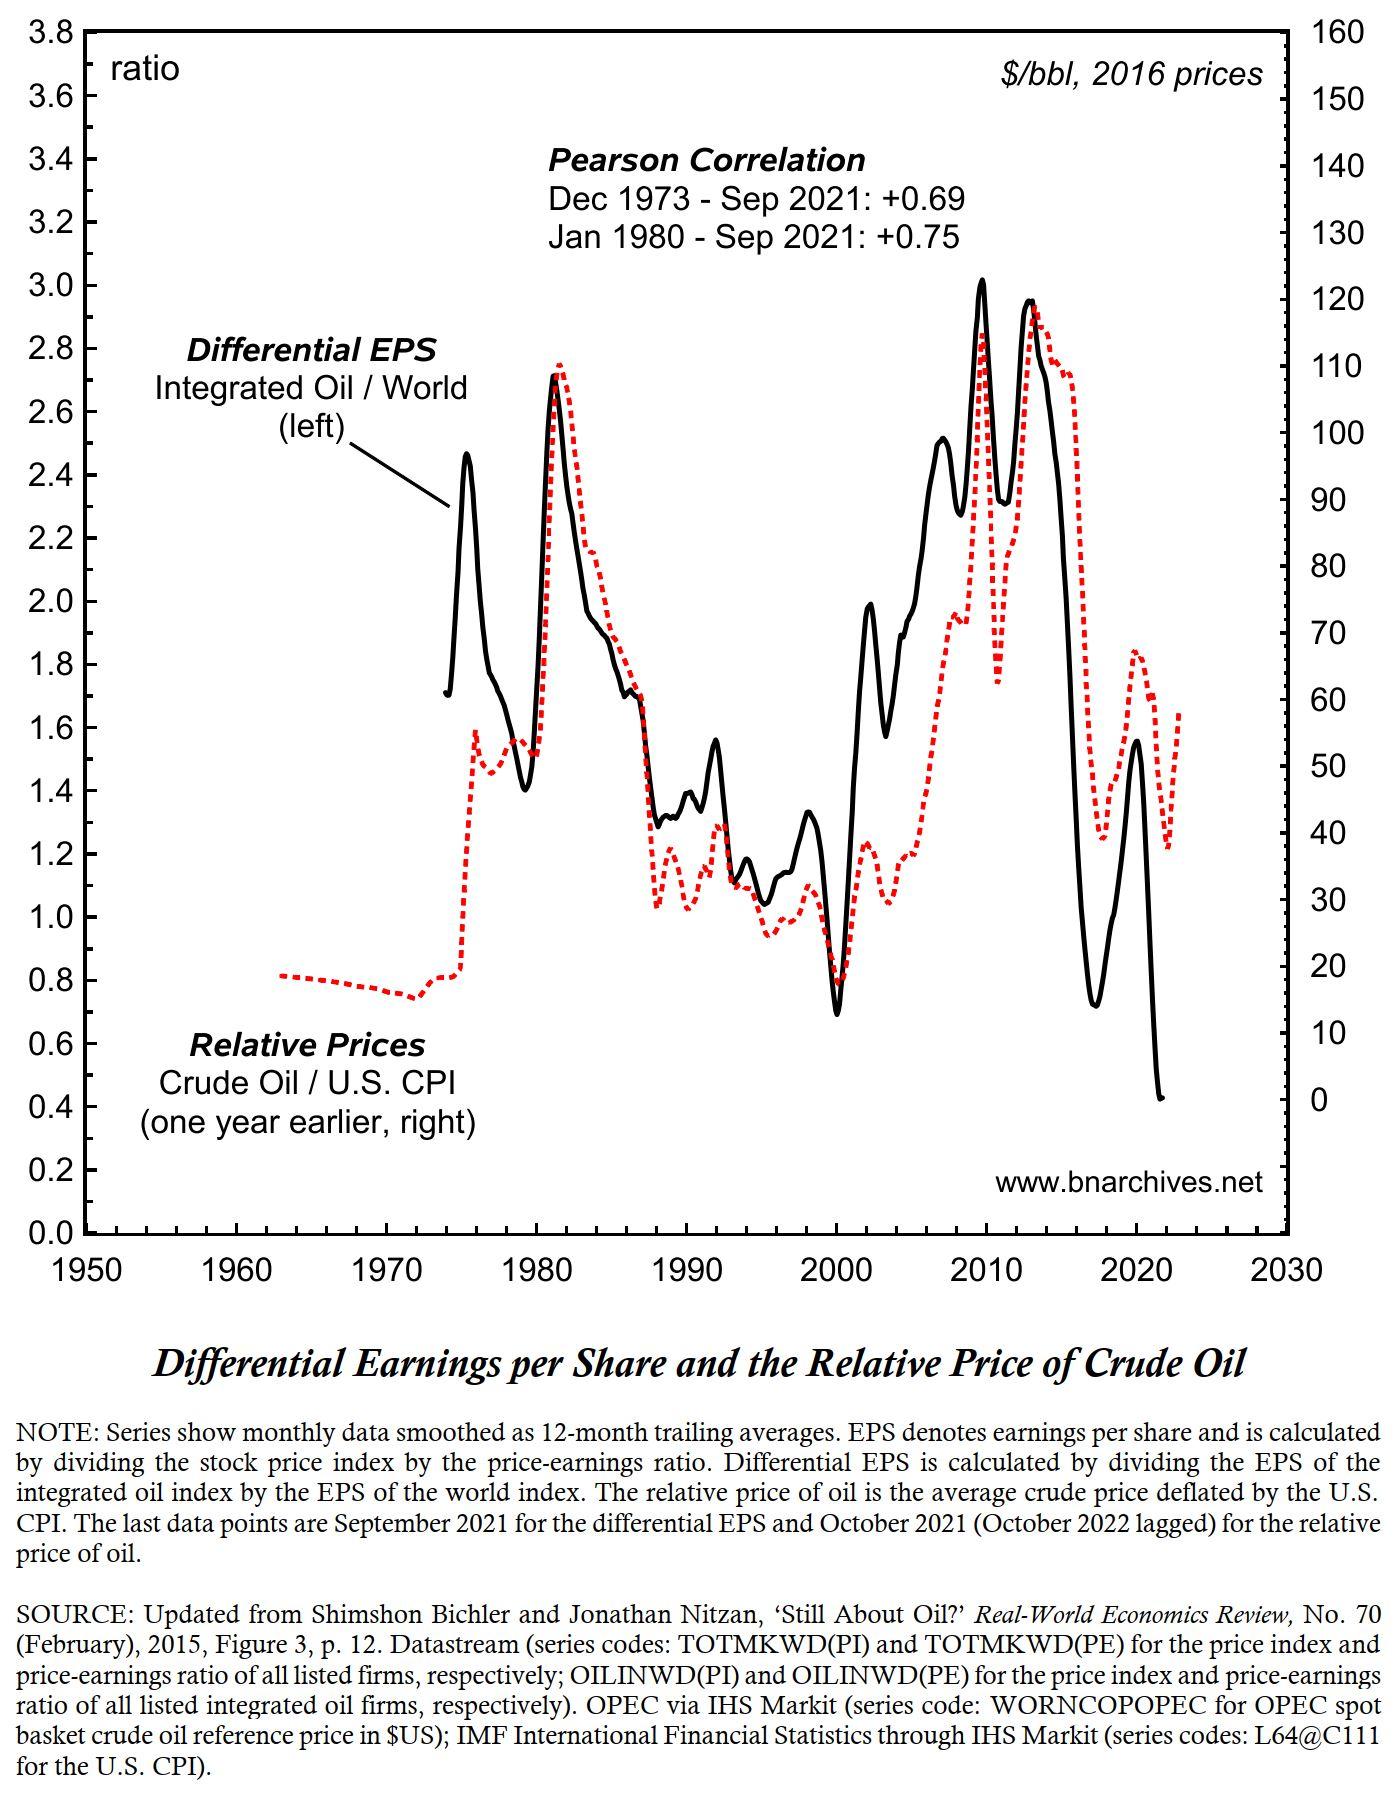 Relative oil prices and differential oil profits